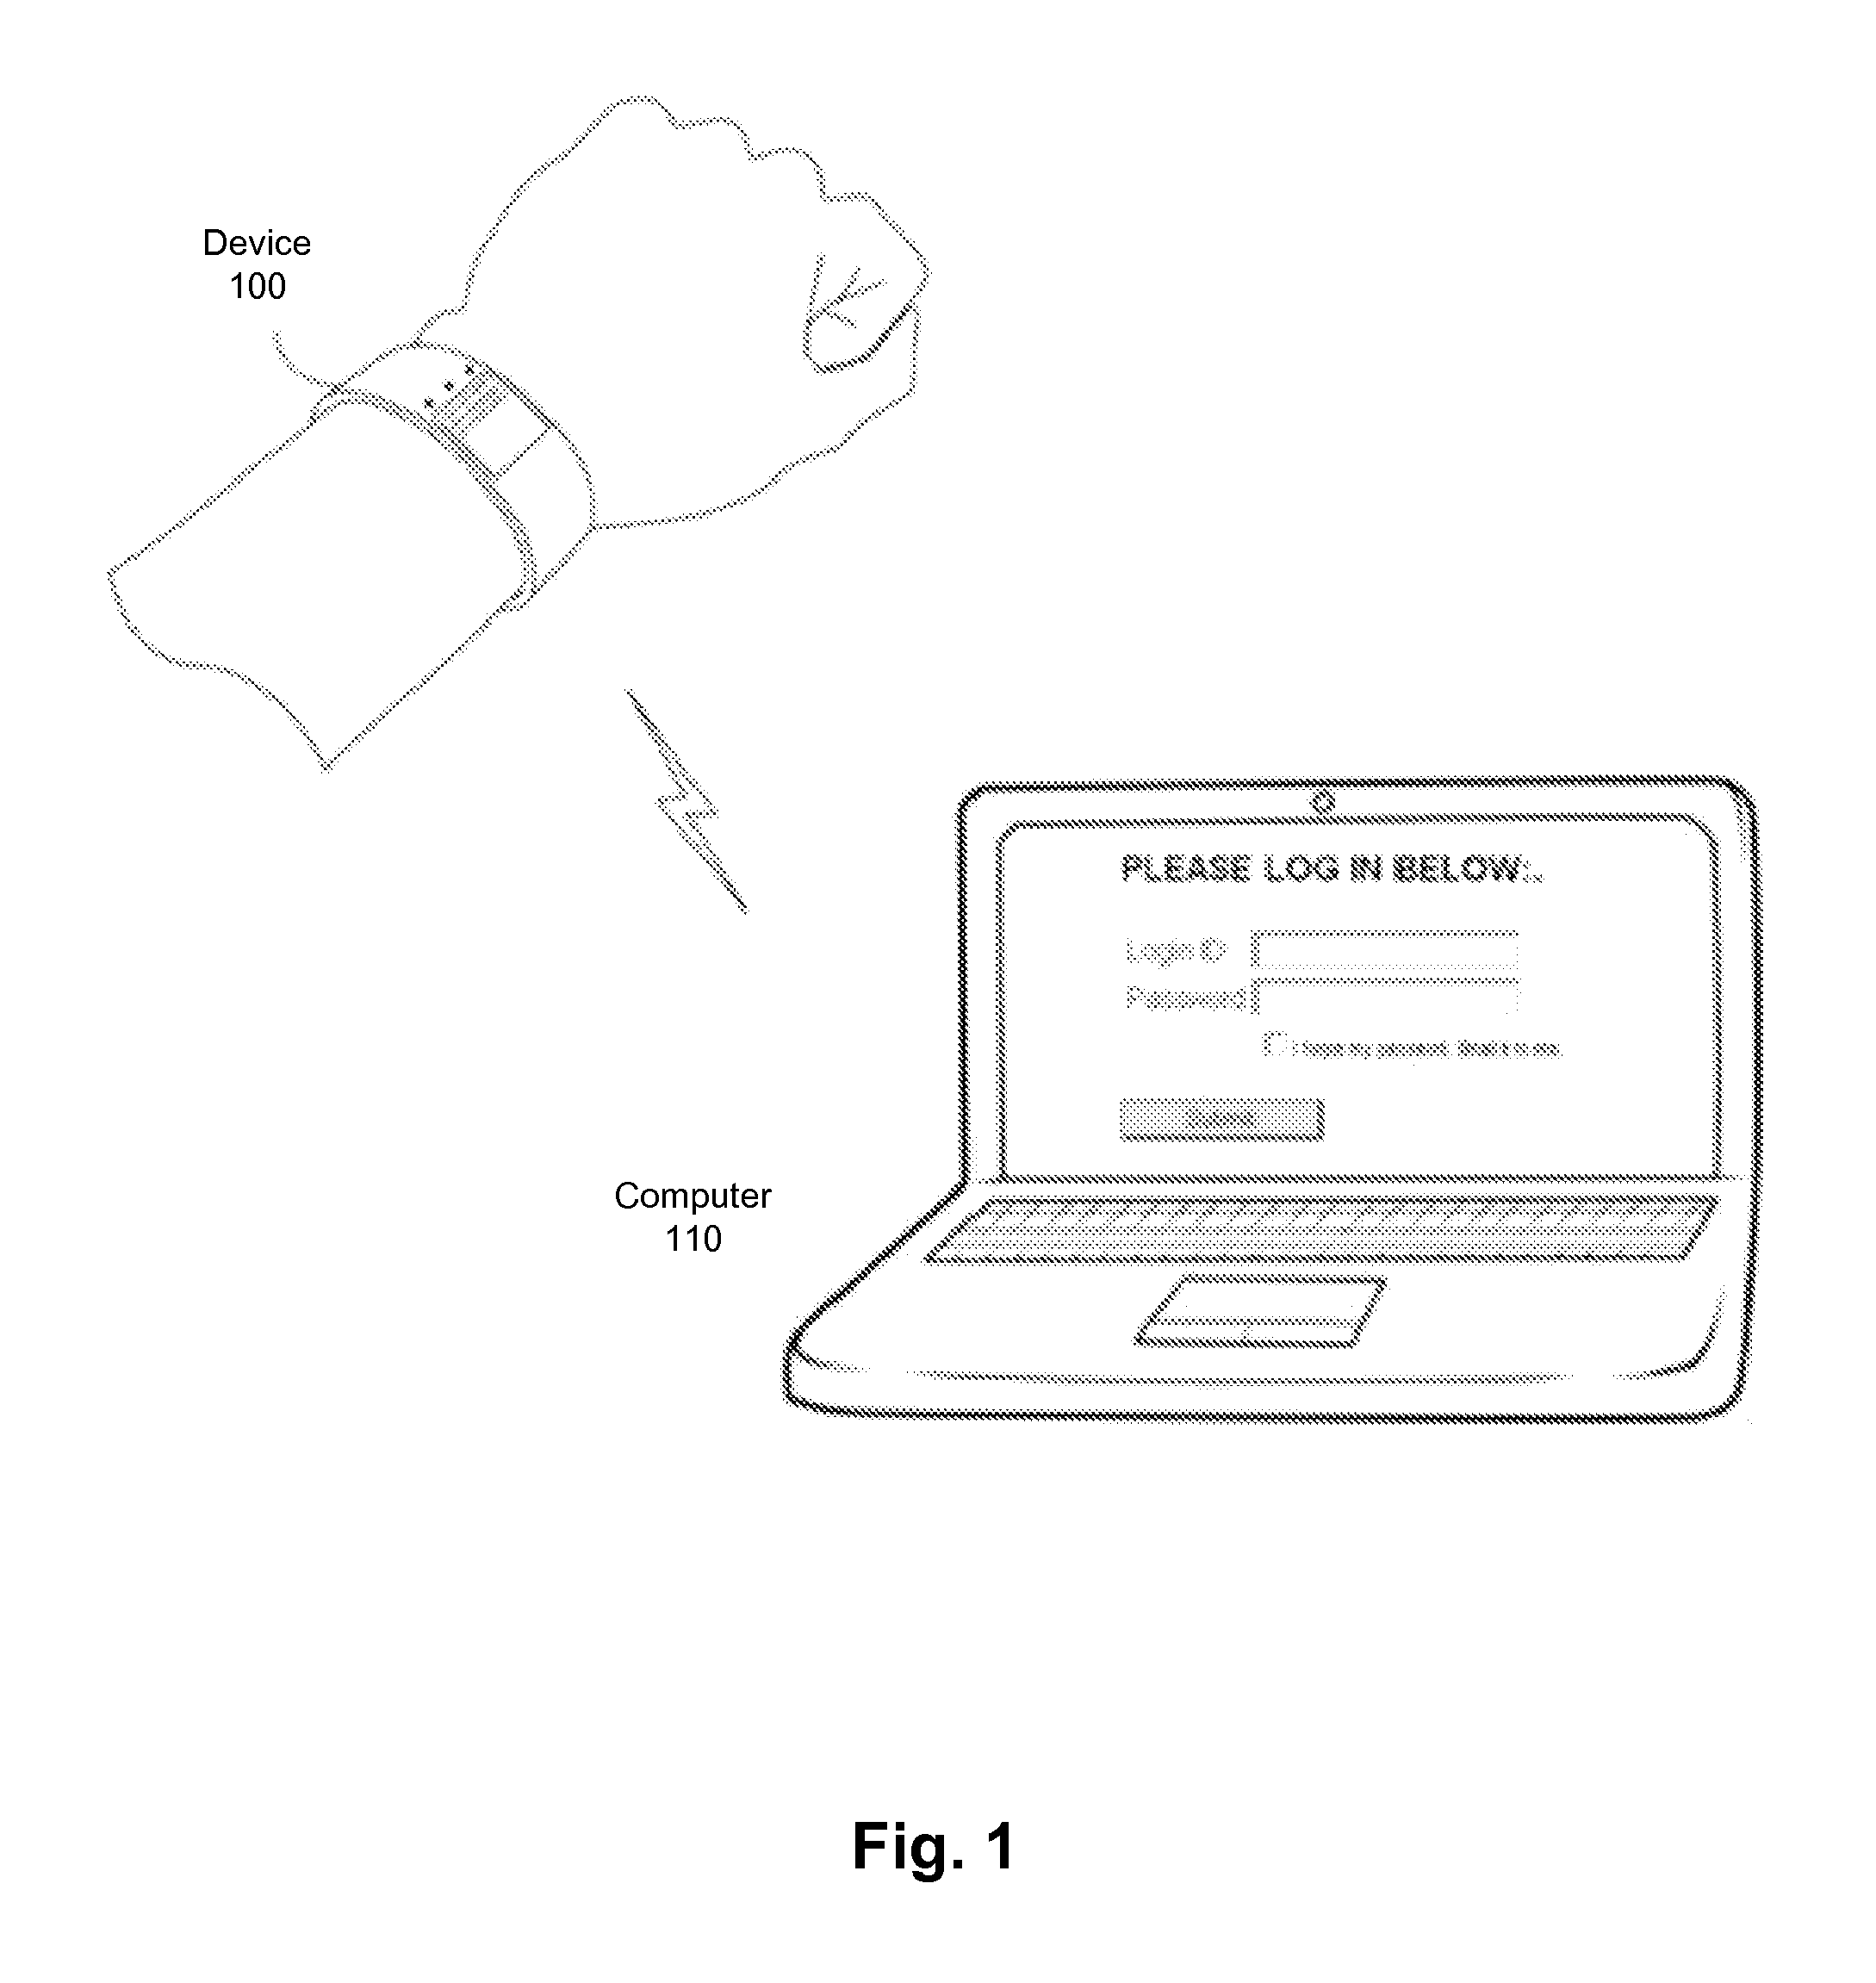 Method and apparatus for automated password entry